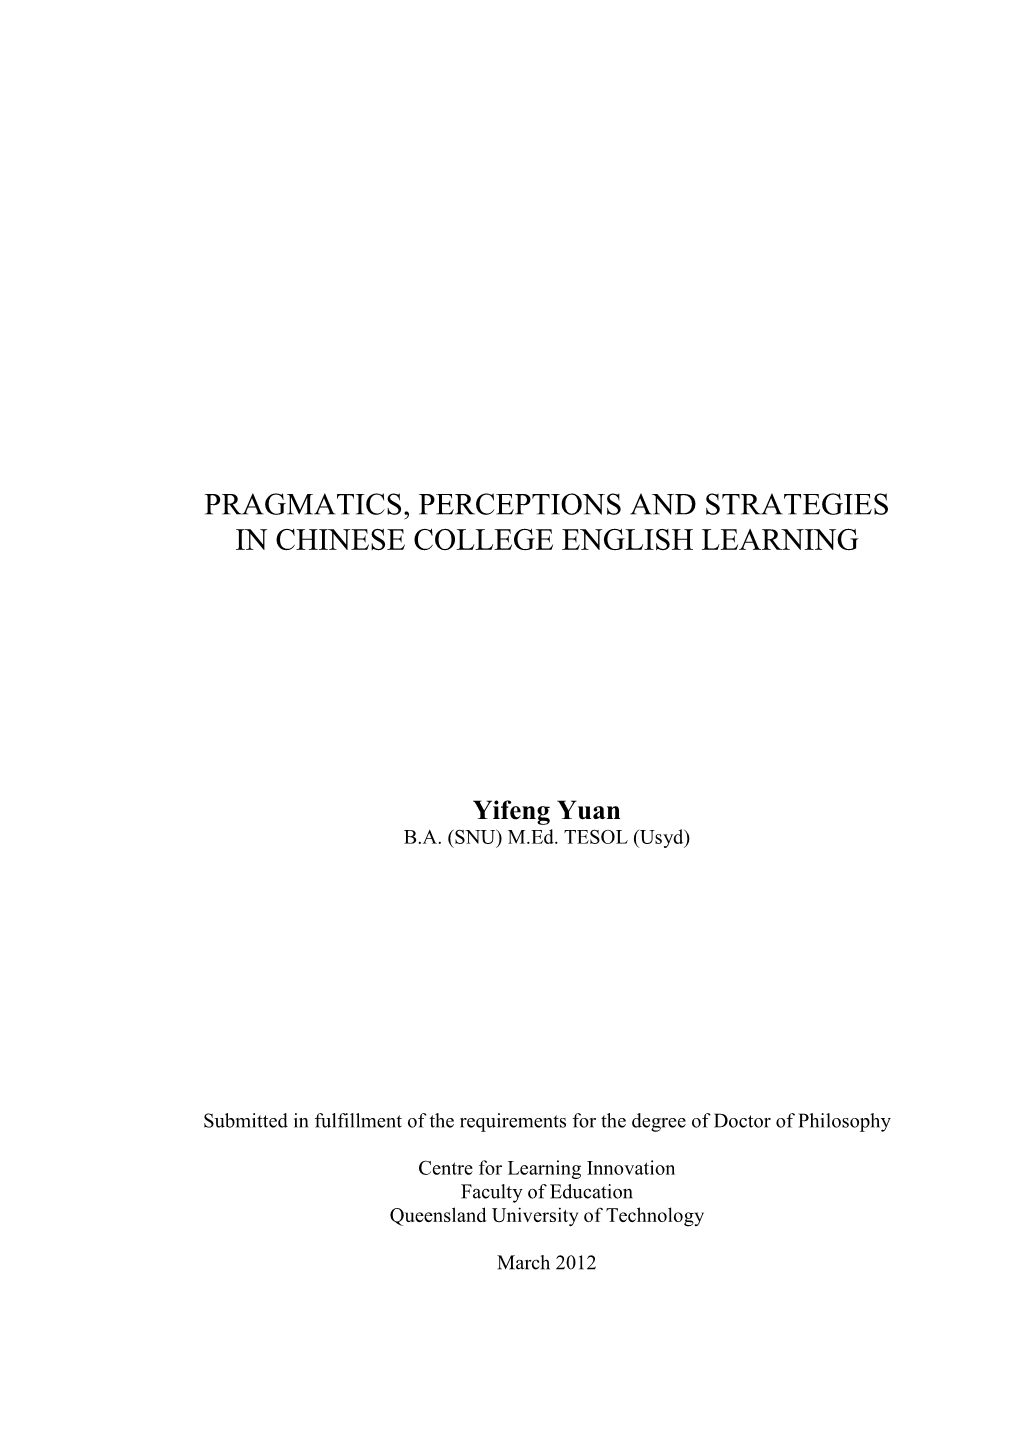 Pragmatics, Perceptions and Strategies in Chinese College English Learning